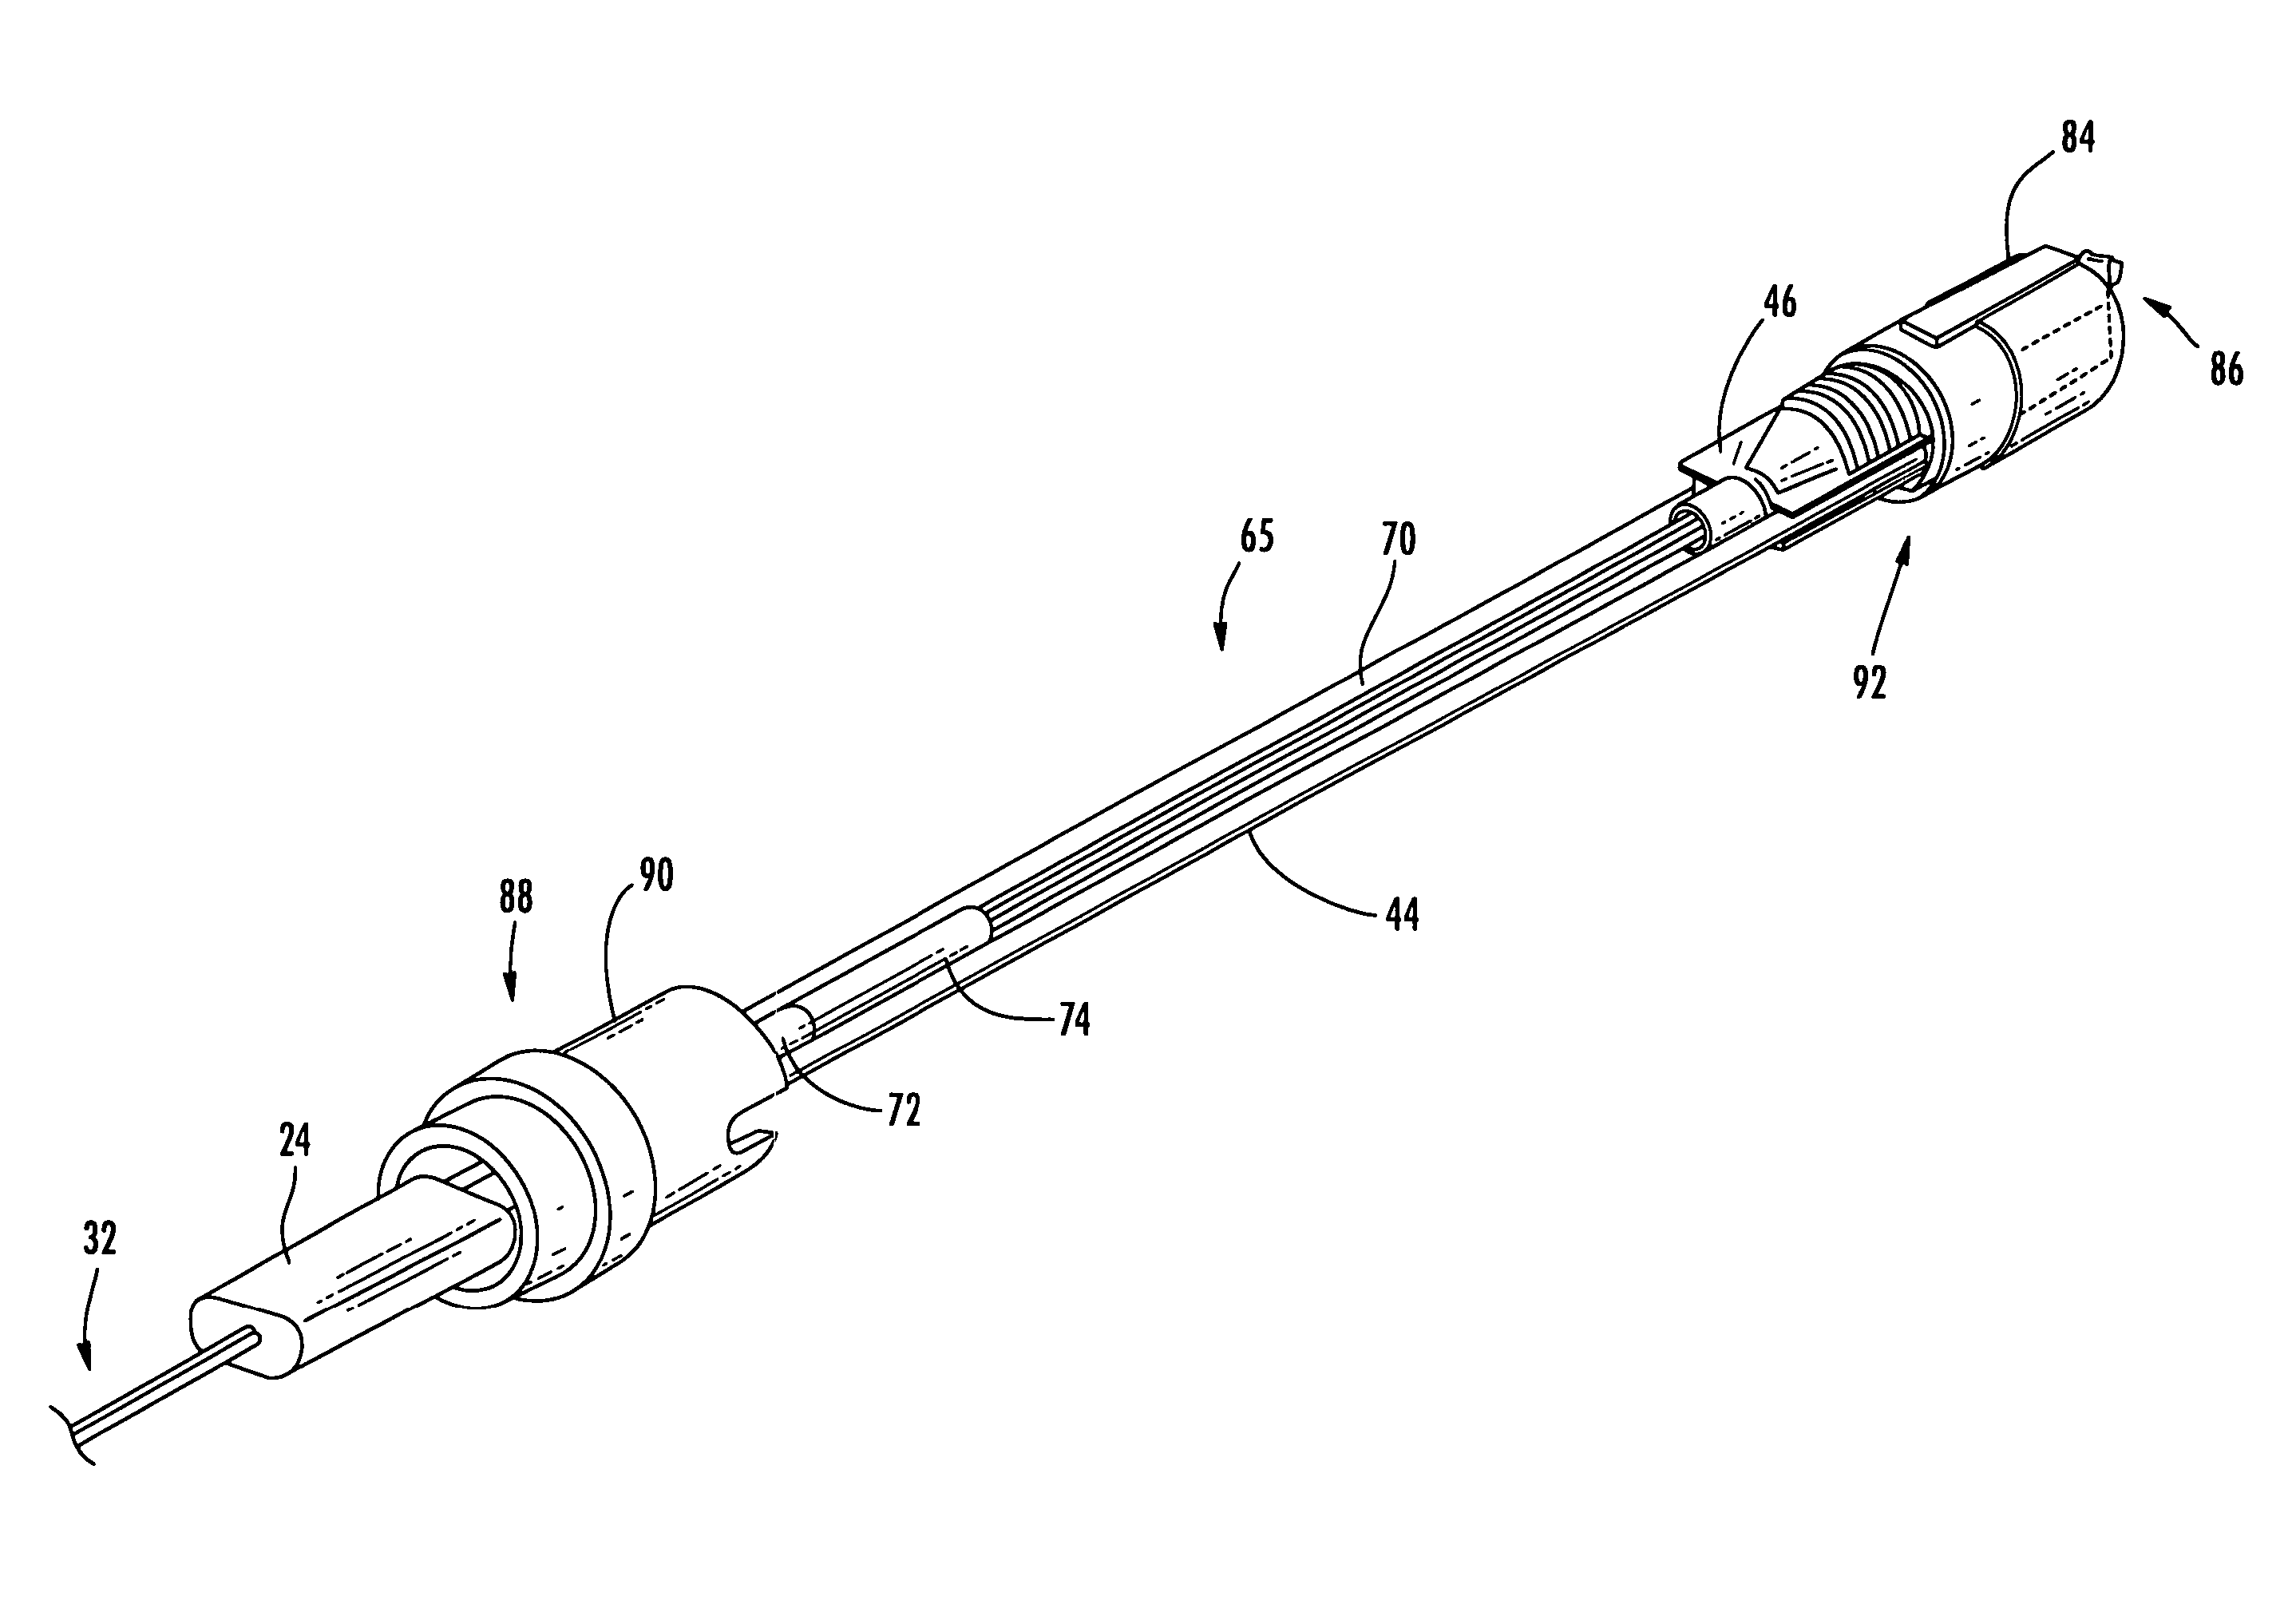 Drop cable with fiber optic connector and methods for fabricating same